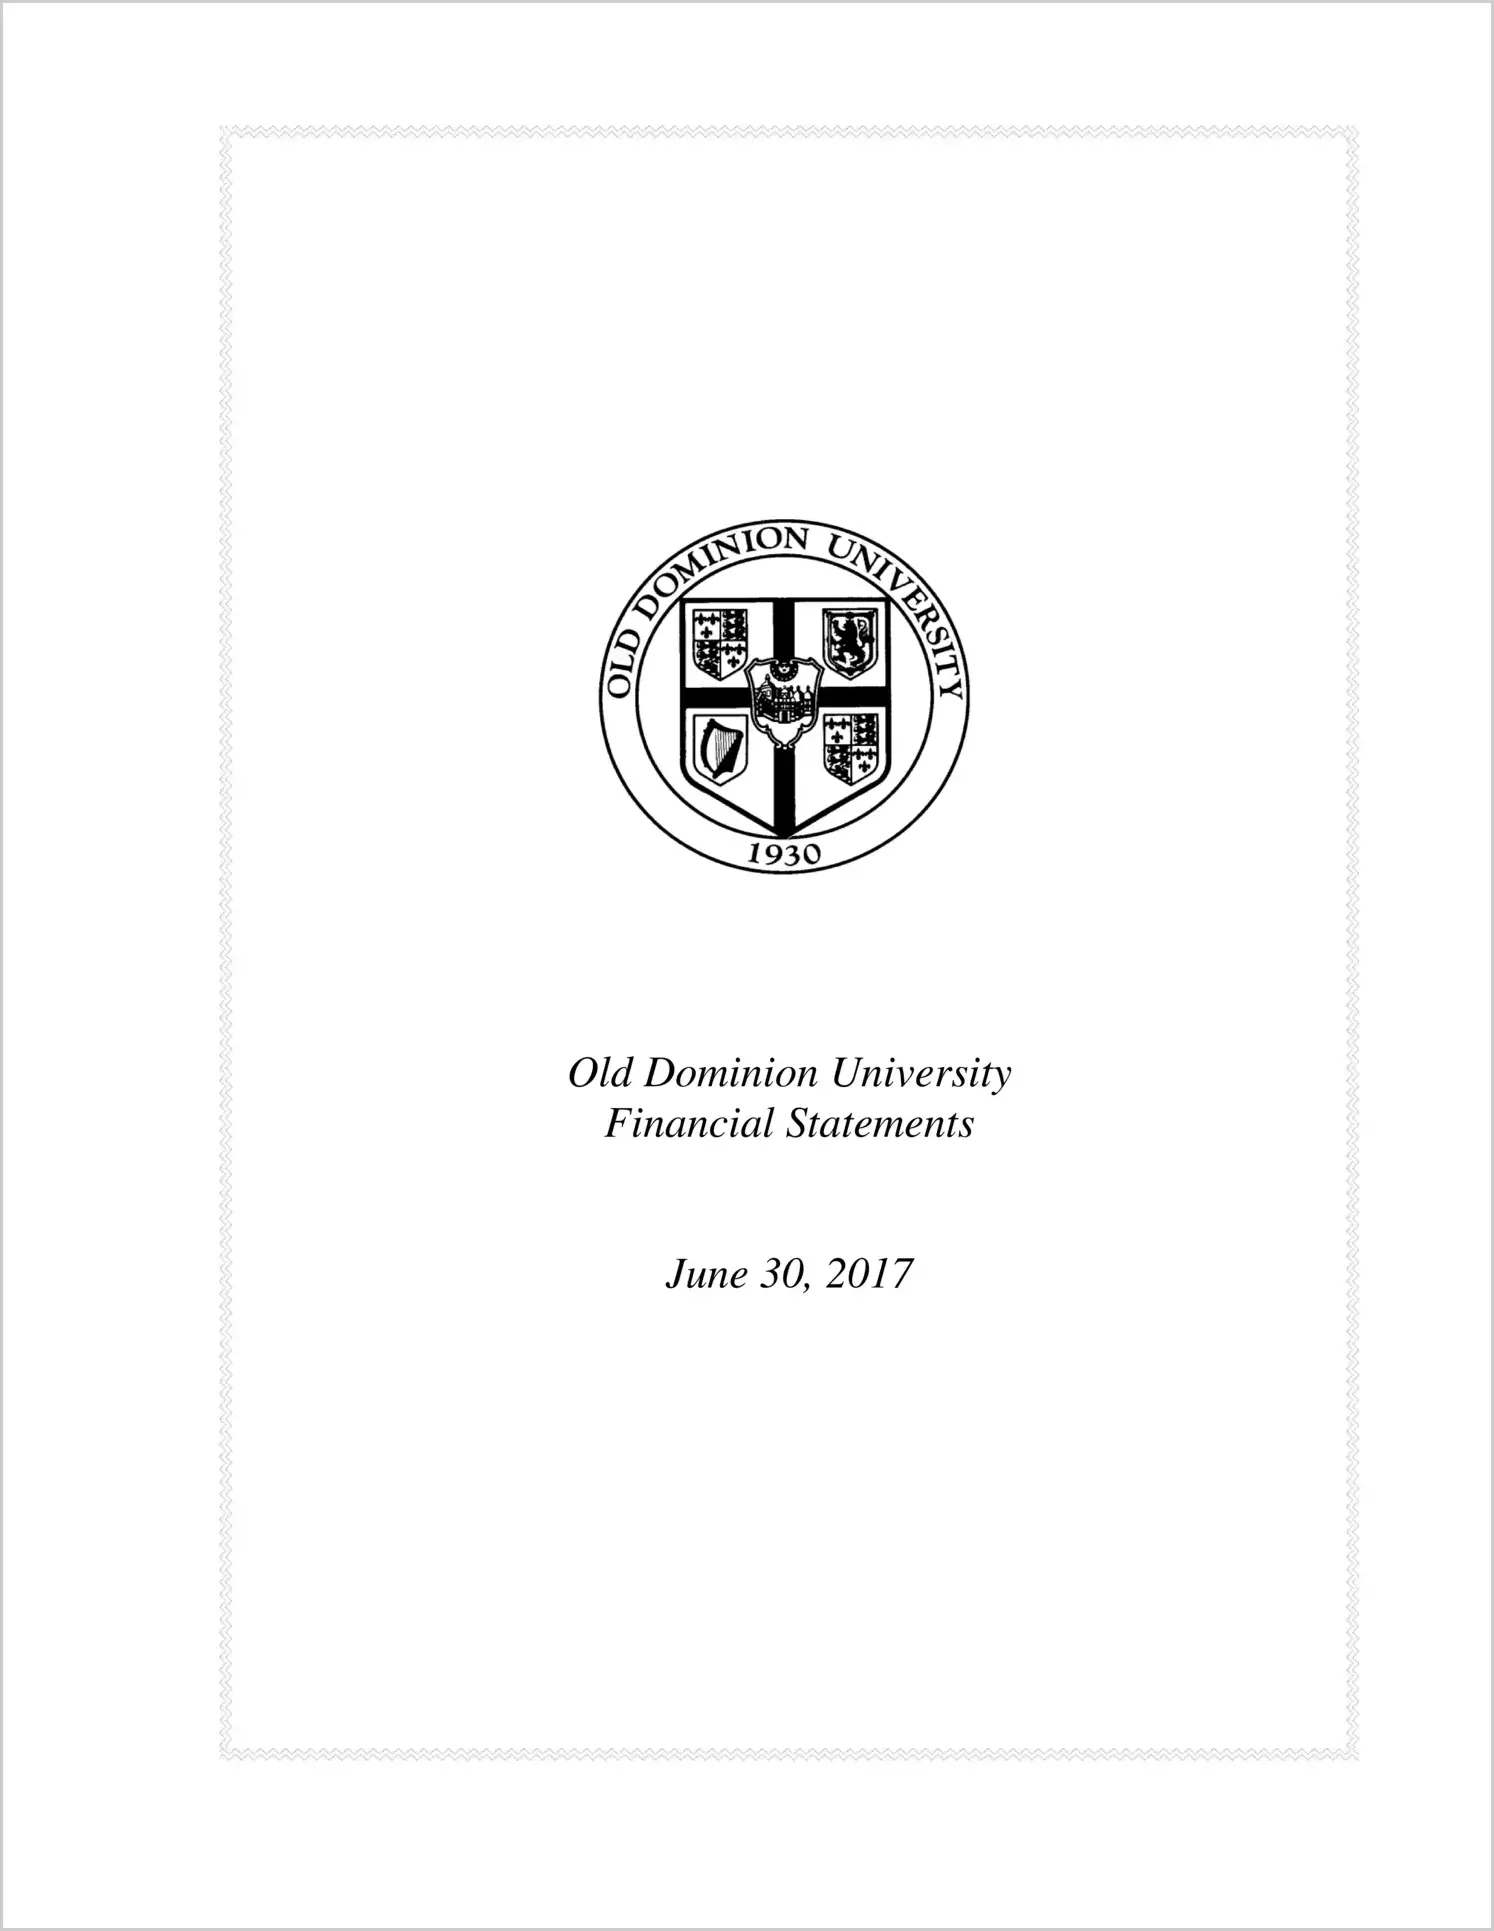 Old Dominion University Financial Statements for the year ended June 30, 2017